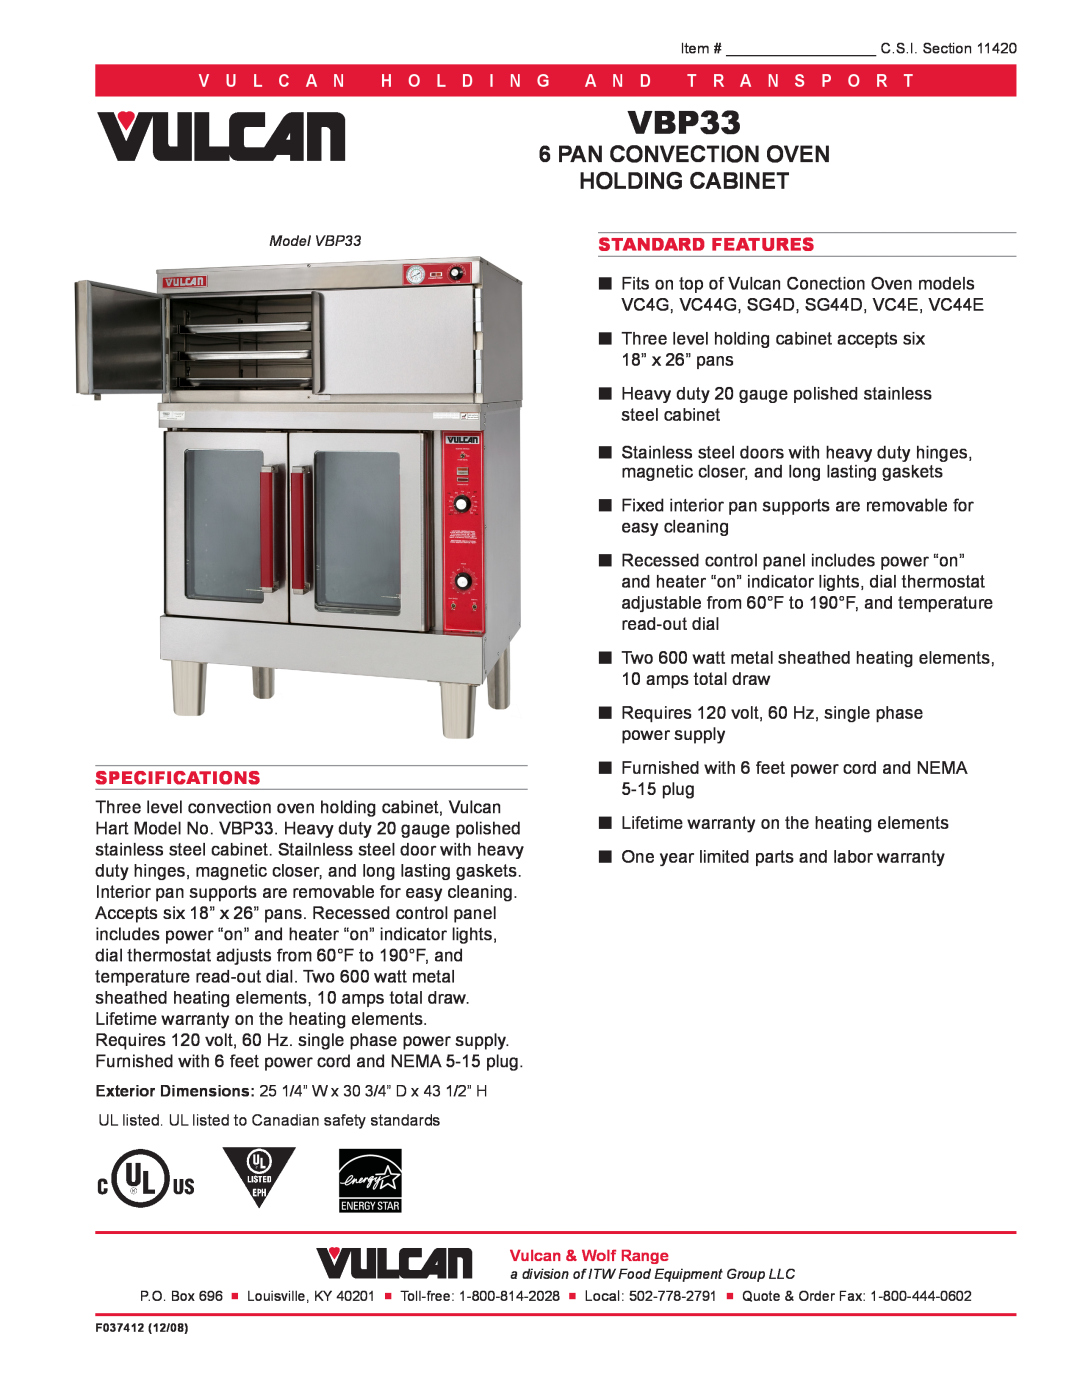 Vulcan-Hart SG44D, VC4E specifications VBP33, Pan Convection Oven Holding Cabinet, V U L C A N H O L D I N, Specifications 